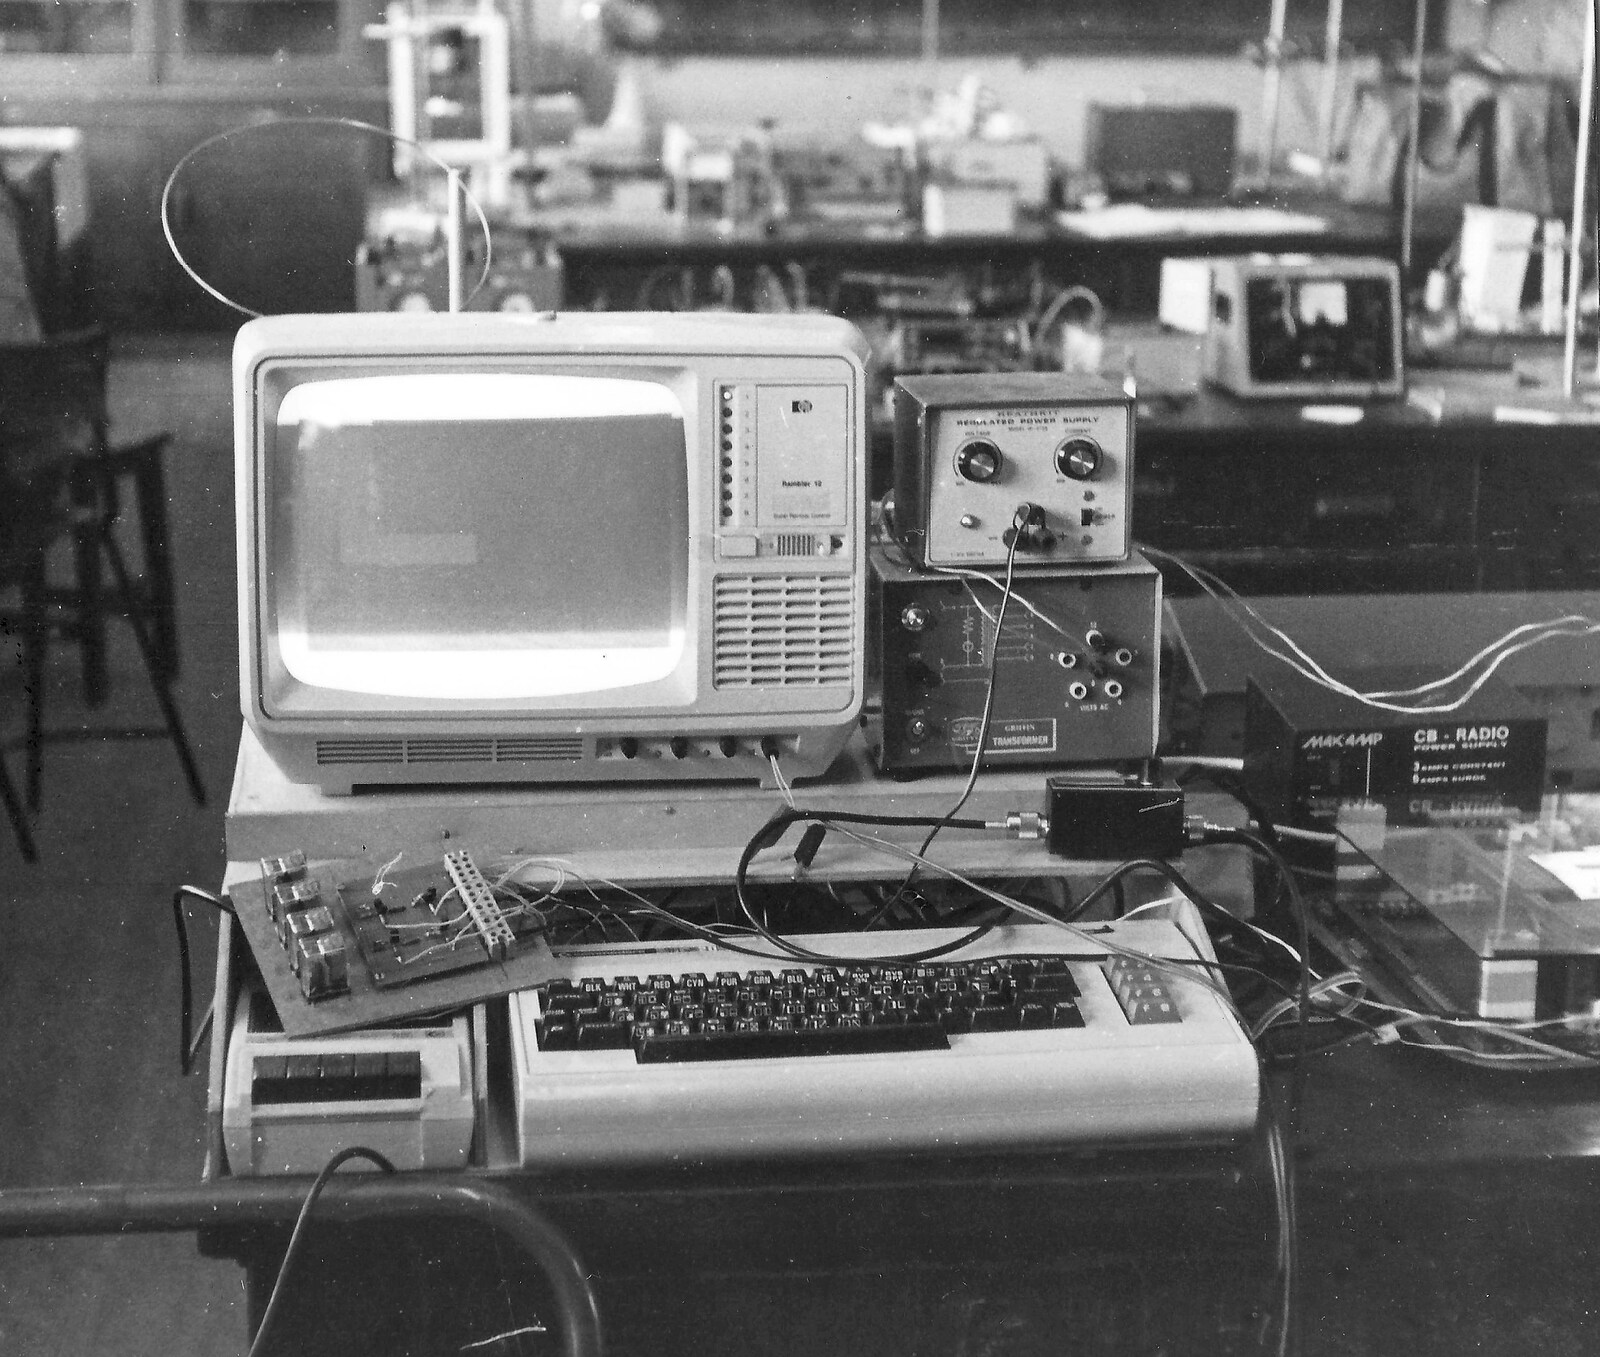 Nosher's VIC-20 in a science project from Learning Black-and-White Photography, Brockenhurst College, Hampshire - 10th March 1985